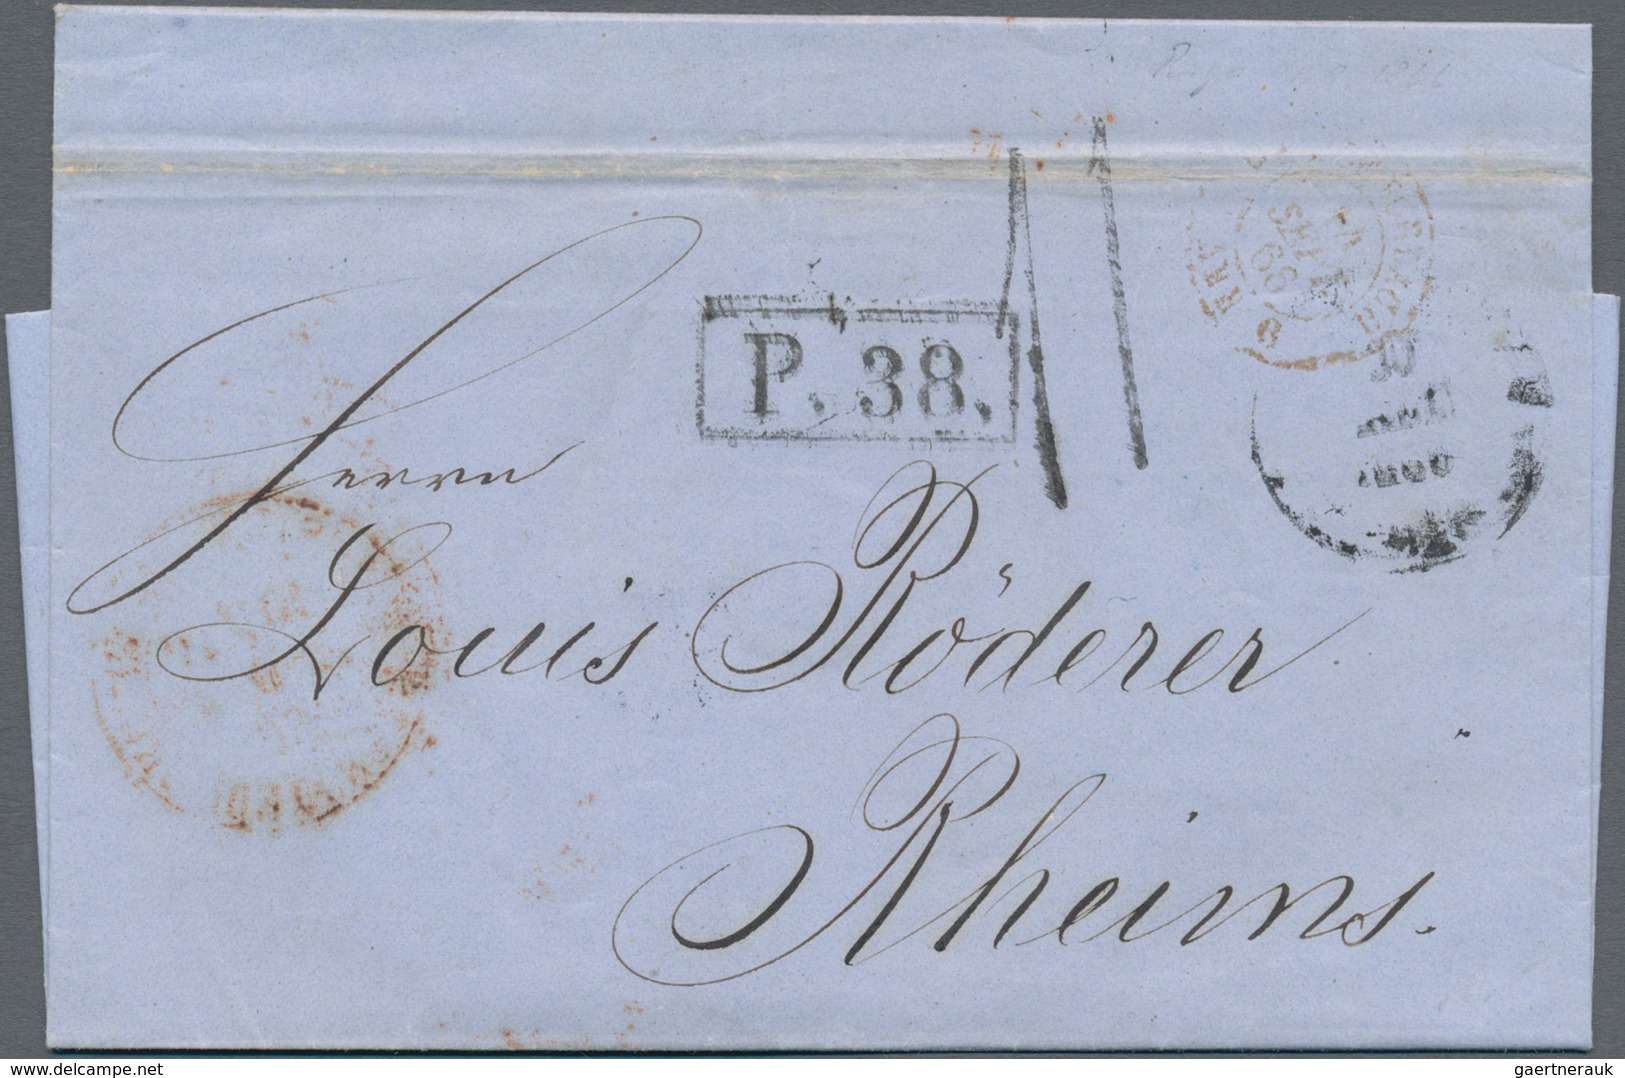 Russland: 1863/1866, four folded letters from RIGA adressed to Roederer in Reims bearing different t